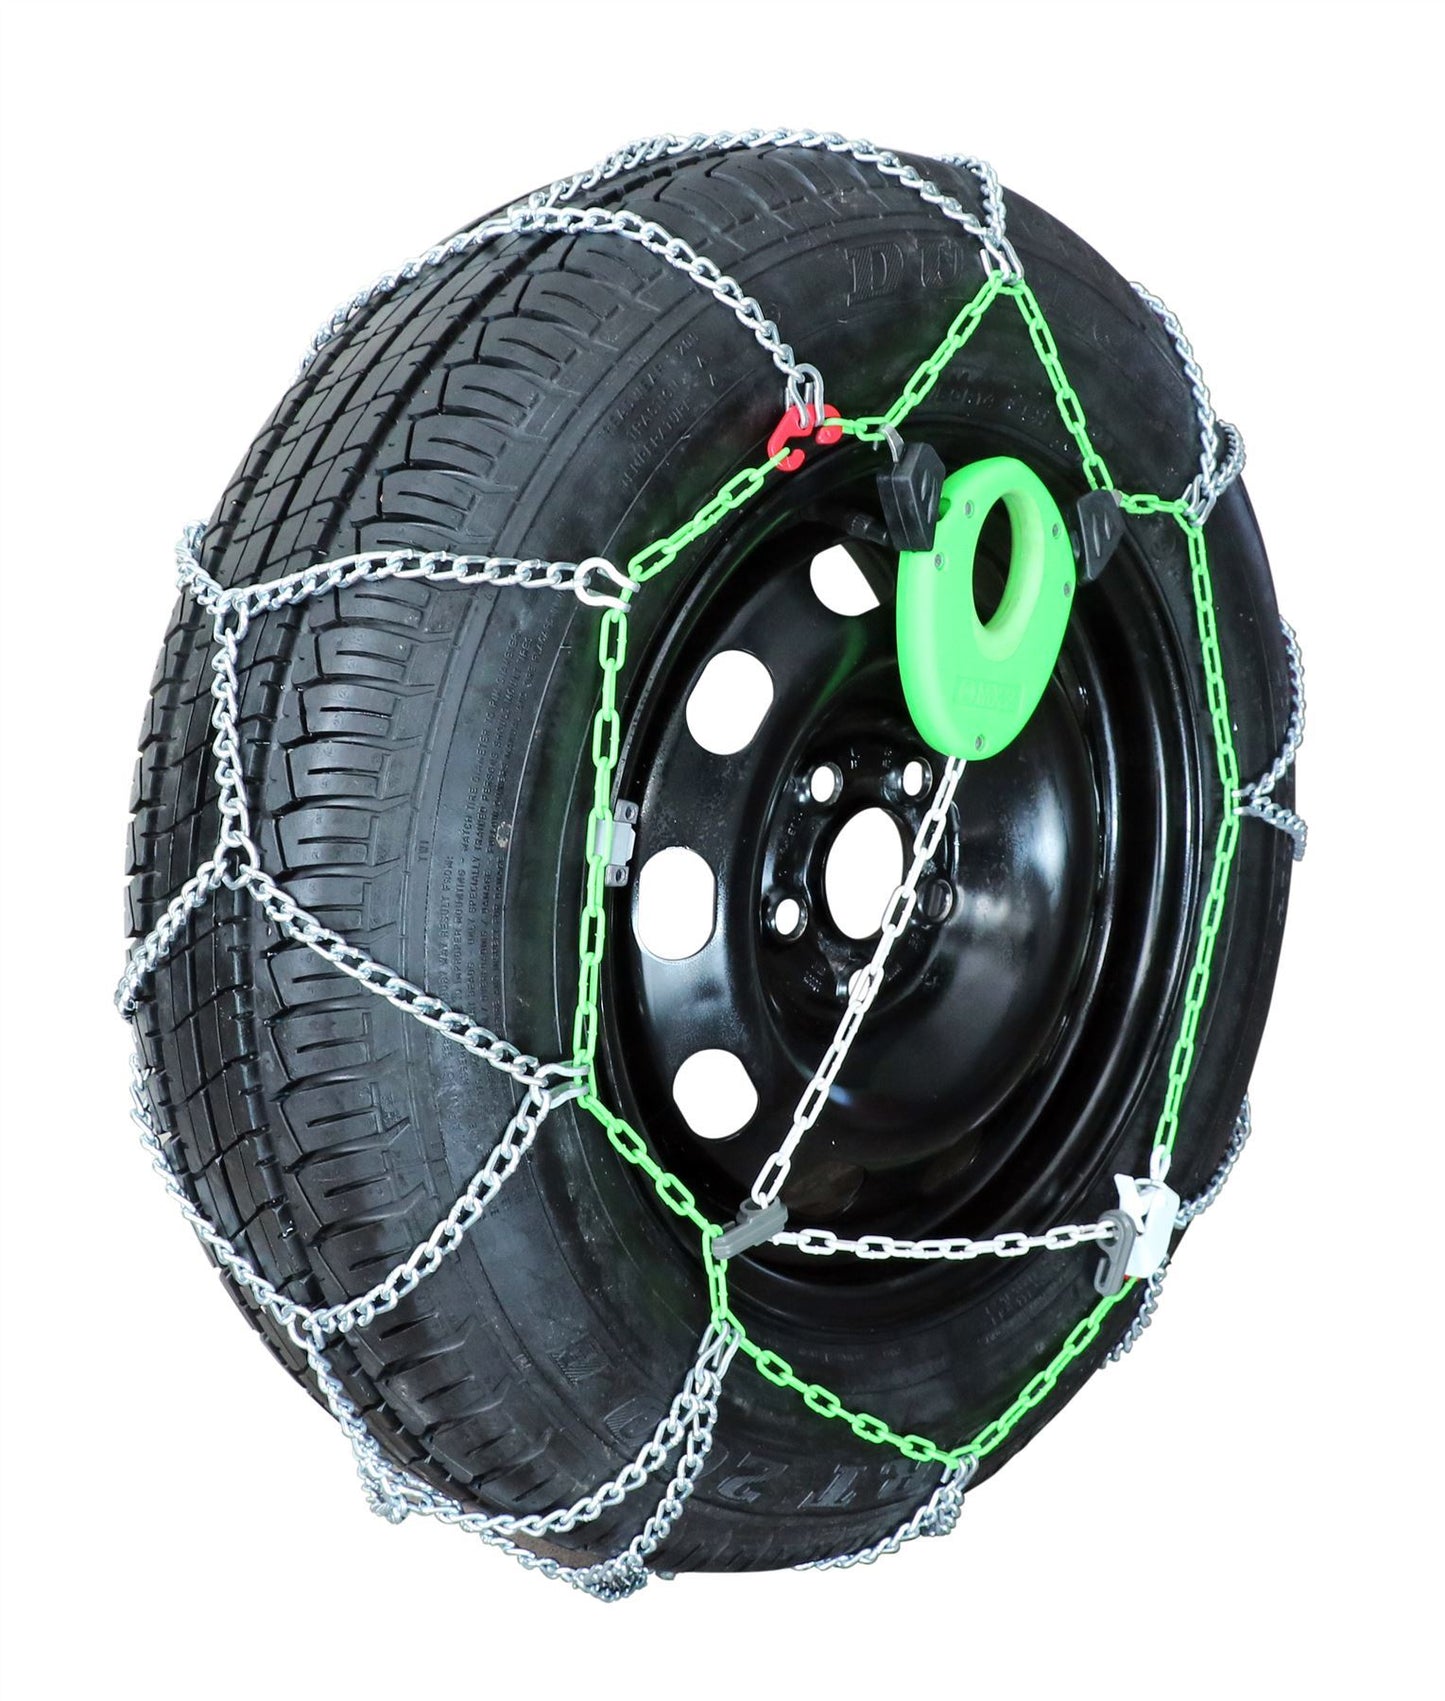 Green Valley TXR7 Winter 7mm Snow Chains - Car Tyre for 19" Wheels 255/35-19